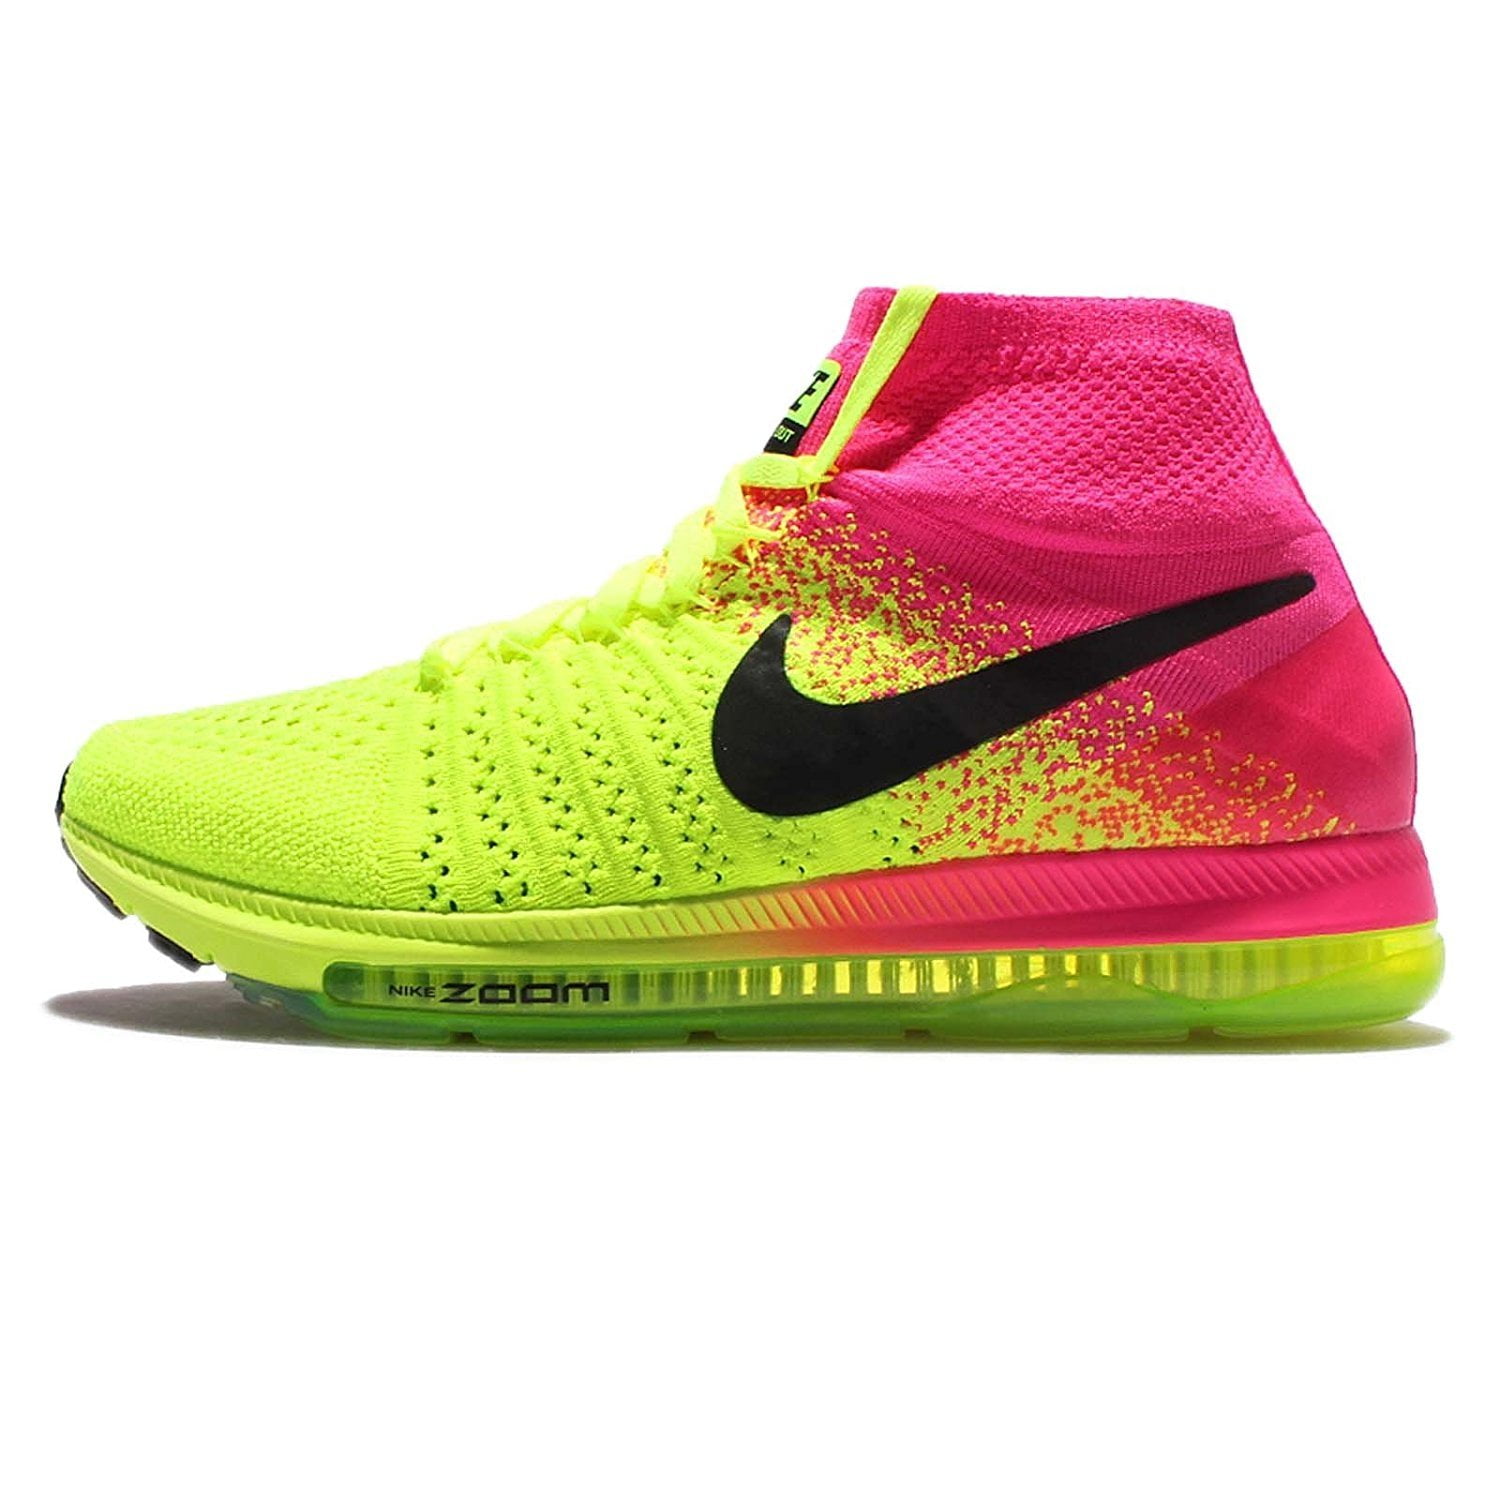 nike women's zoom all out flyknit running shoes